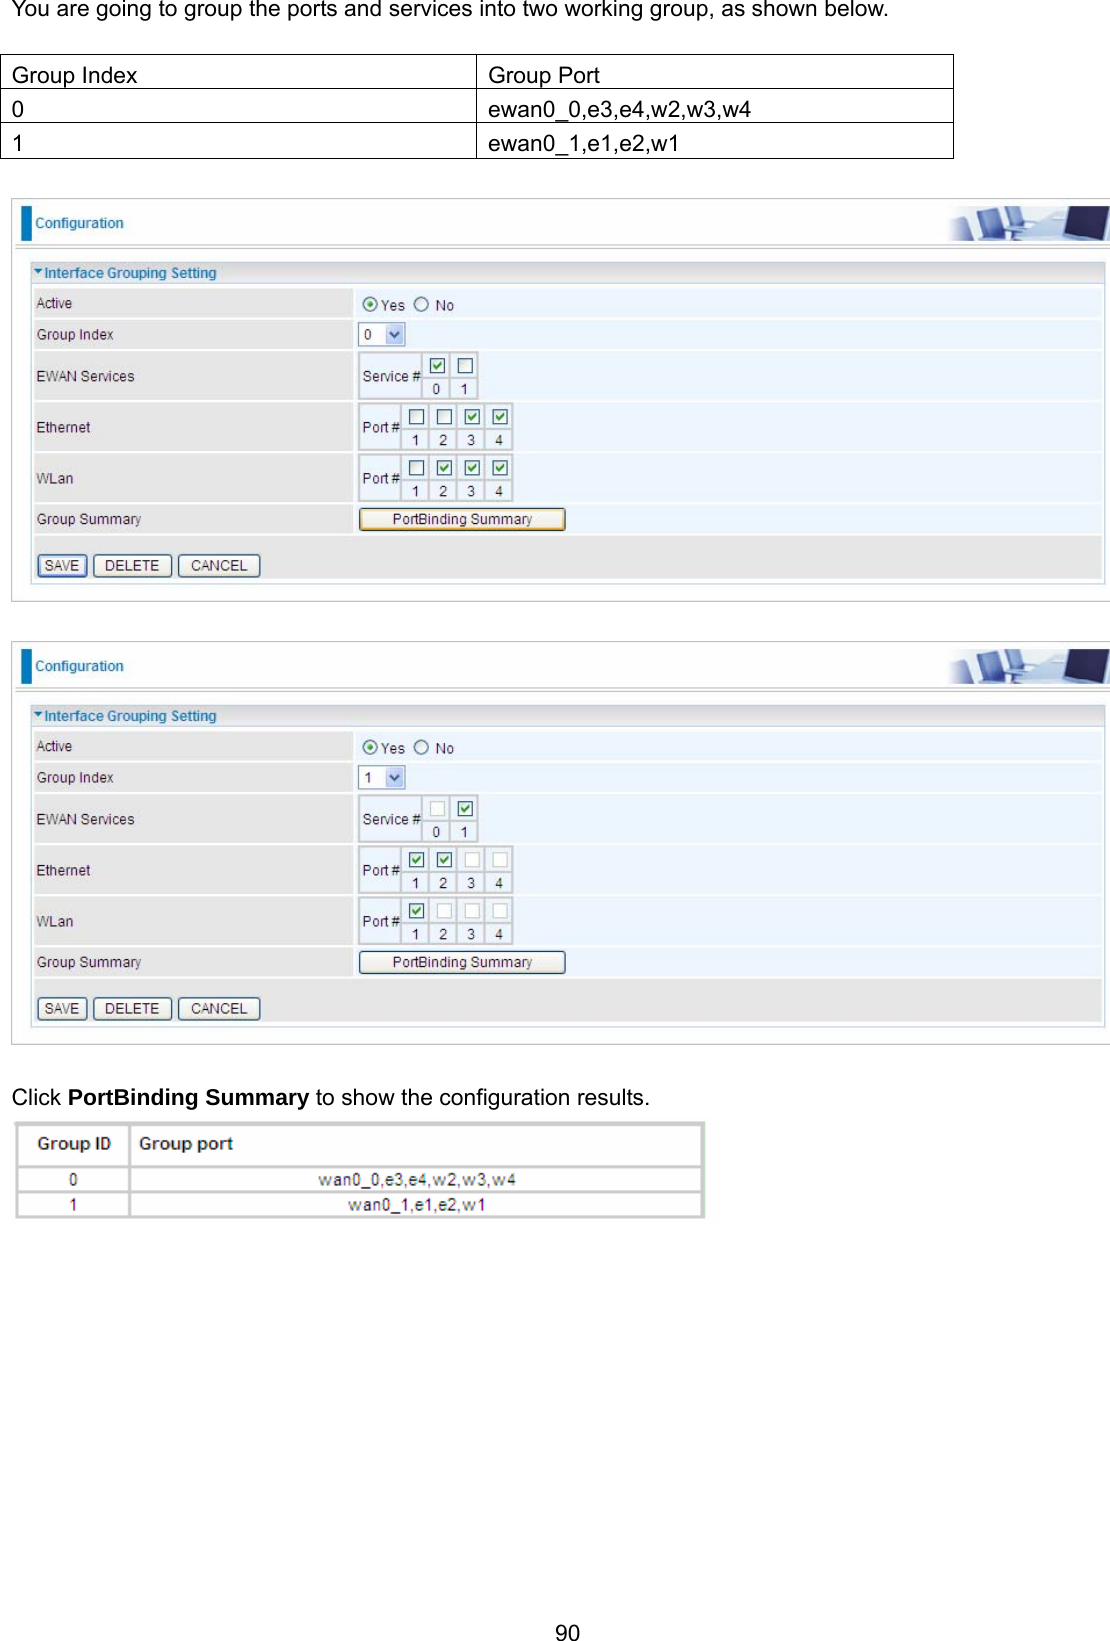 90 You are going to group the ports and services into two working group, as shown below.   Group Index  Group Port 0 ewan0_0,e3,e4,w2,w3,w4 1 ewan0_1,e1,e2,w1      Click PortBinding Summary to show the configuration results.   